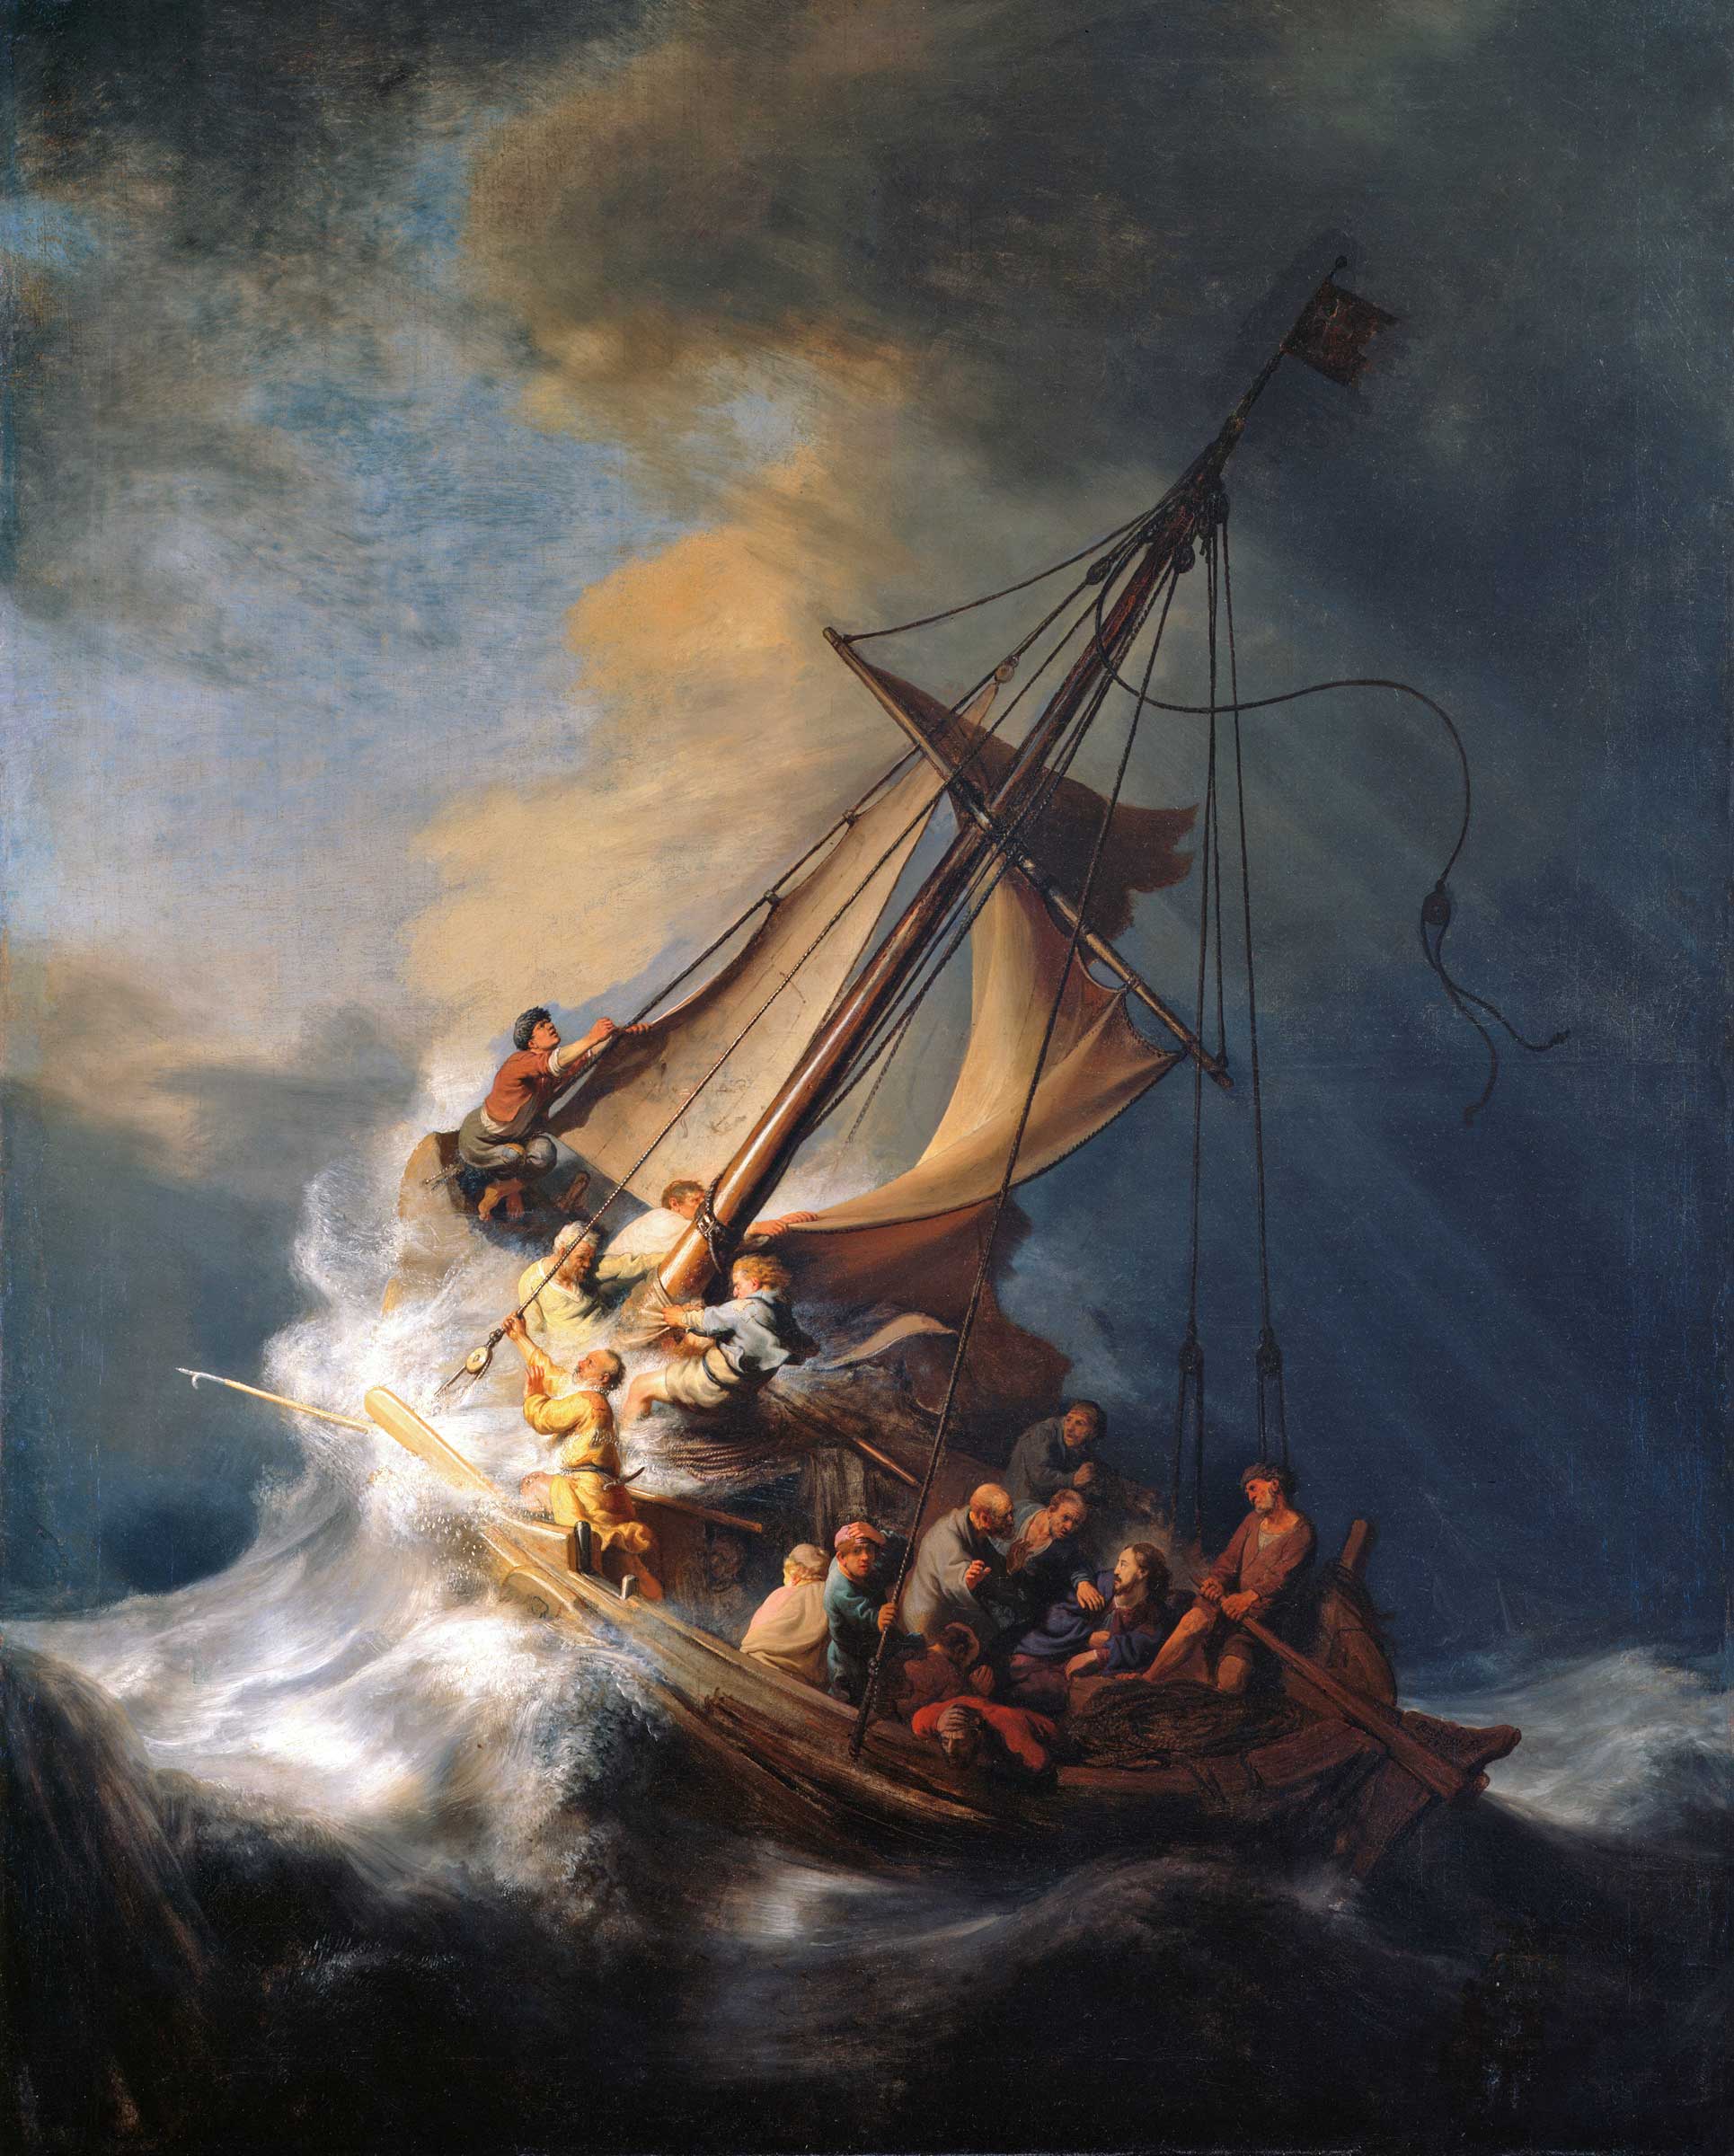 The Storm on the Sea of Galilee by Rembrandt van Rijn (1606-1669), subject of the libretti for the cantatas on Epiphany IV, BWV 81 and 14. It is Rembrandt's only known seascape. This painting was stolen in 1980 from a Boston museum, along with 12 others including a Vermeer, and remains lost.